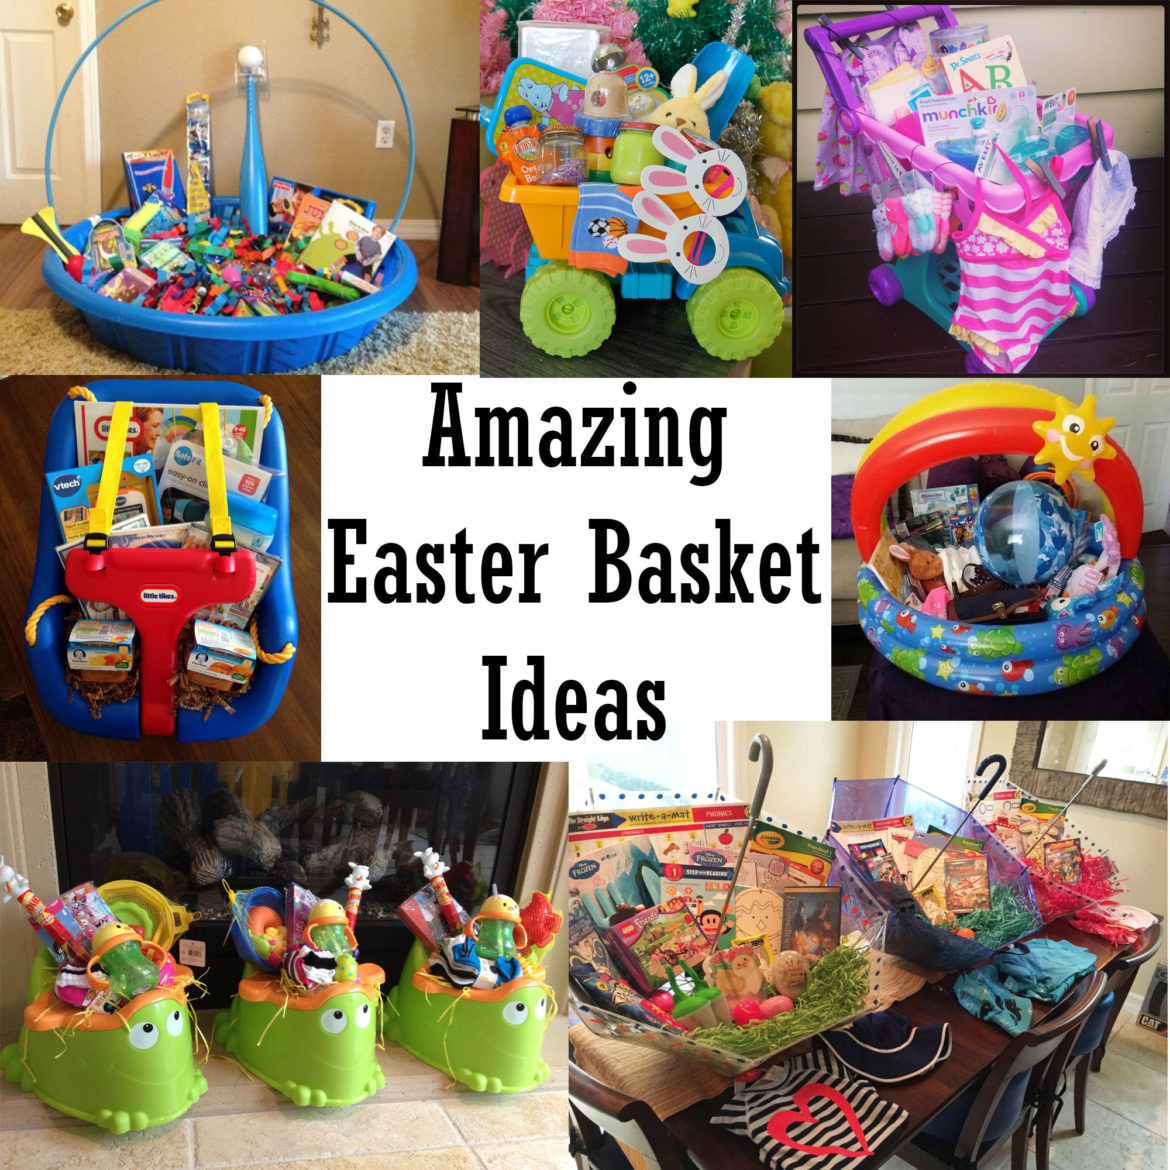 Ideas For Easter
 Amazing Easter Basket Ideas The Keeper of the Cheerios